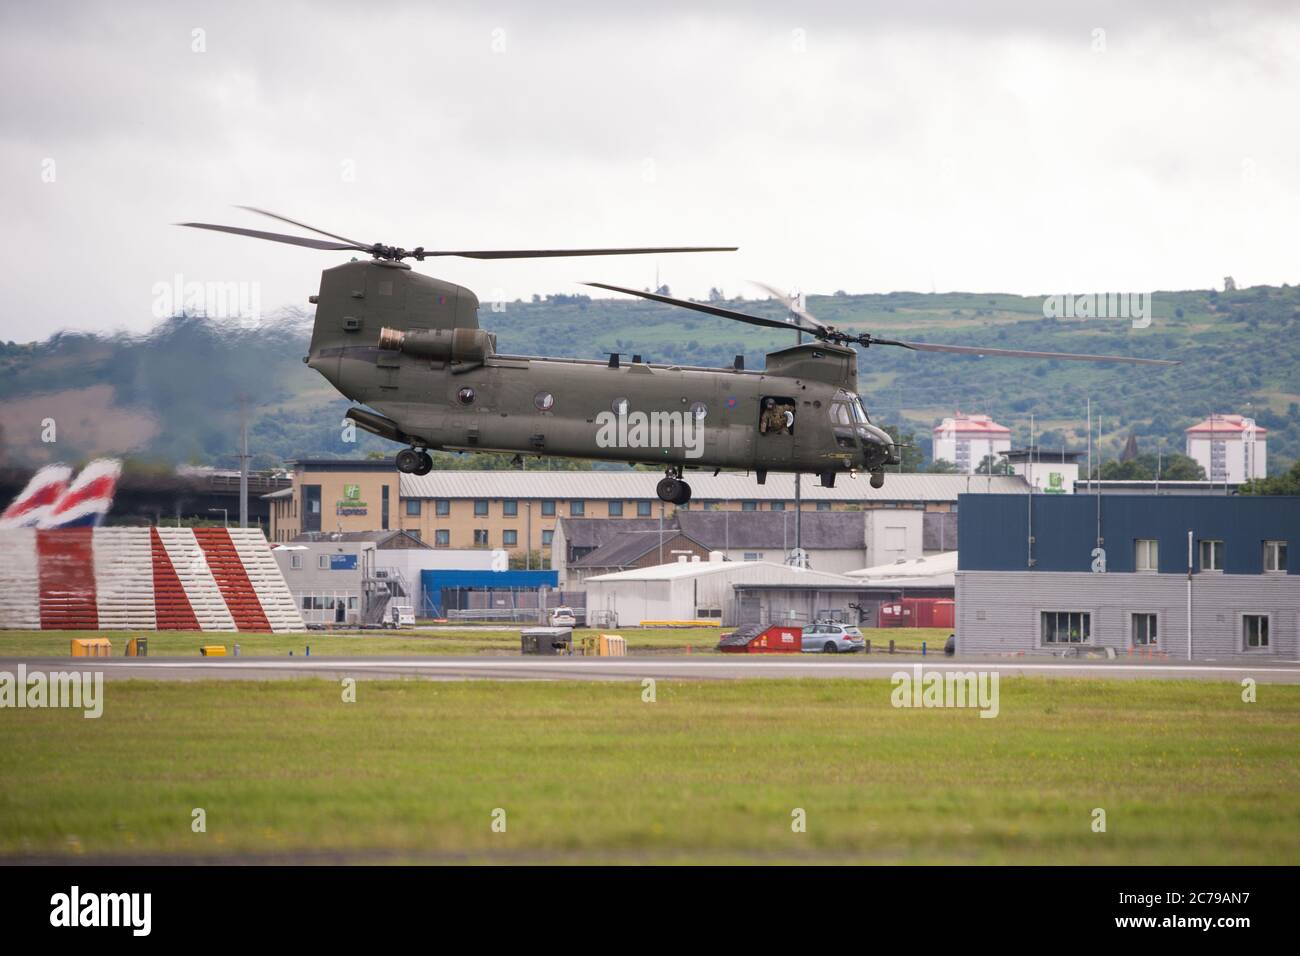 Glasgow, Scotland, UK. 15th July, 2020. Pictured: Royal Air Force Chinook Helicopters seen on the tarmac and taking off from Glasgow International Airport. One of the helicopters had gone ‘technical' with an engine problem and a spare part has been flown in by another Chinook aircraft. A lot of people and plane spotters were seen around the perimeter fence to watch the choppers taking off.  Credit: Colin Fisher/Alamy Live News Stock Photo